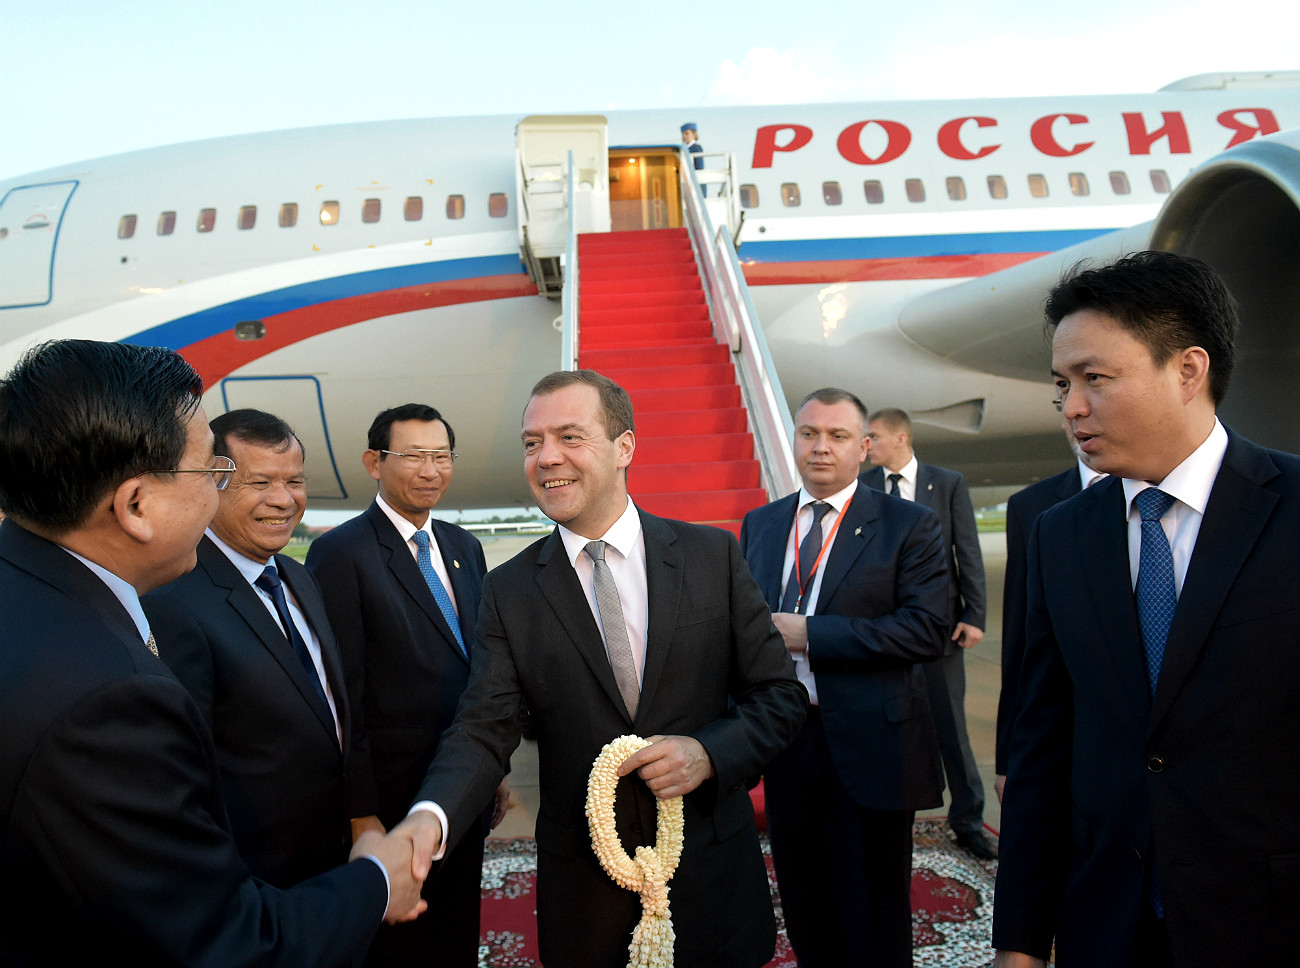 November 23, 2015. Russian Prime Minister Dmitry Medvedev, center, is welcomed at Phnom Penh International Airport during his working visit to the Kingdom of Cambodia.